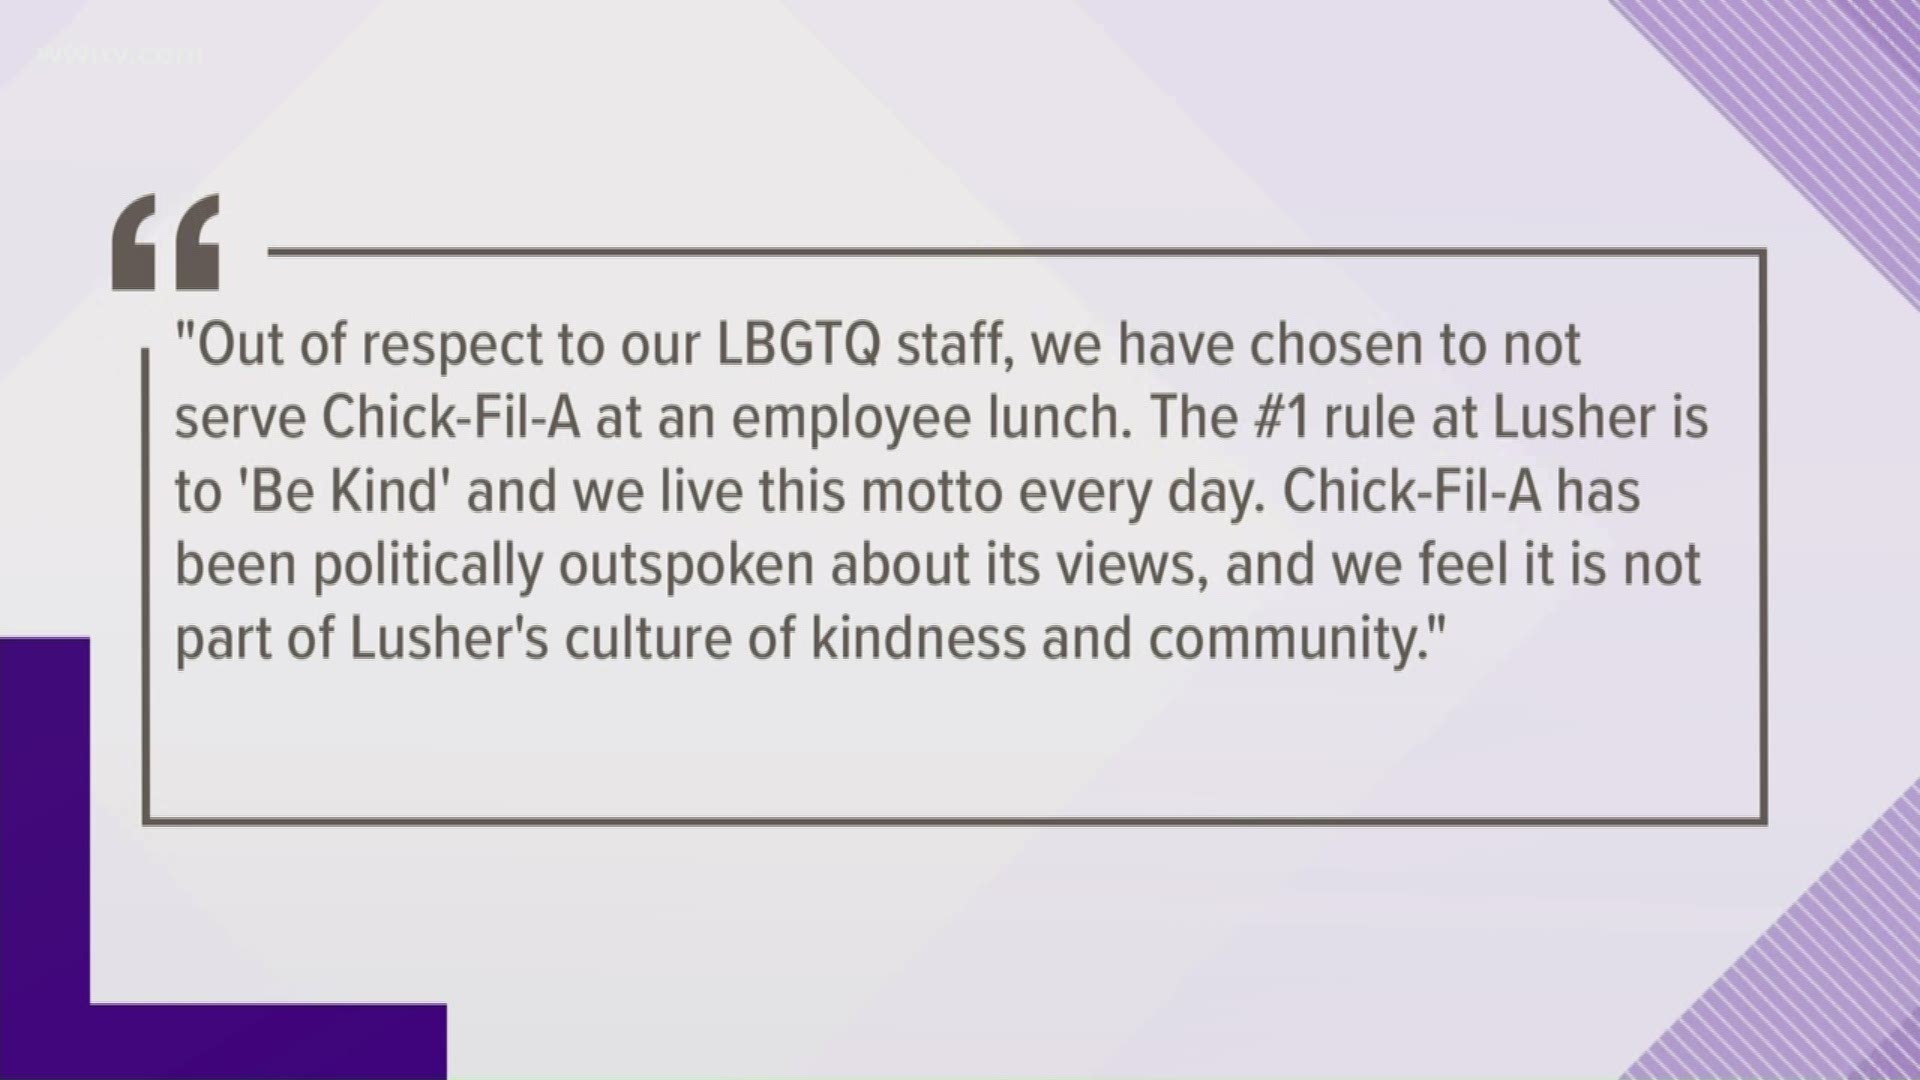 Lusher school has turned down an offer of free lunch on Friday from Chick-fil-A. The school said it did so out of respect for LGBTQ members on its staff.